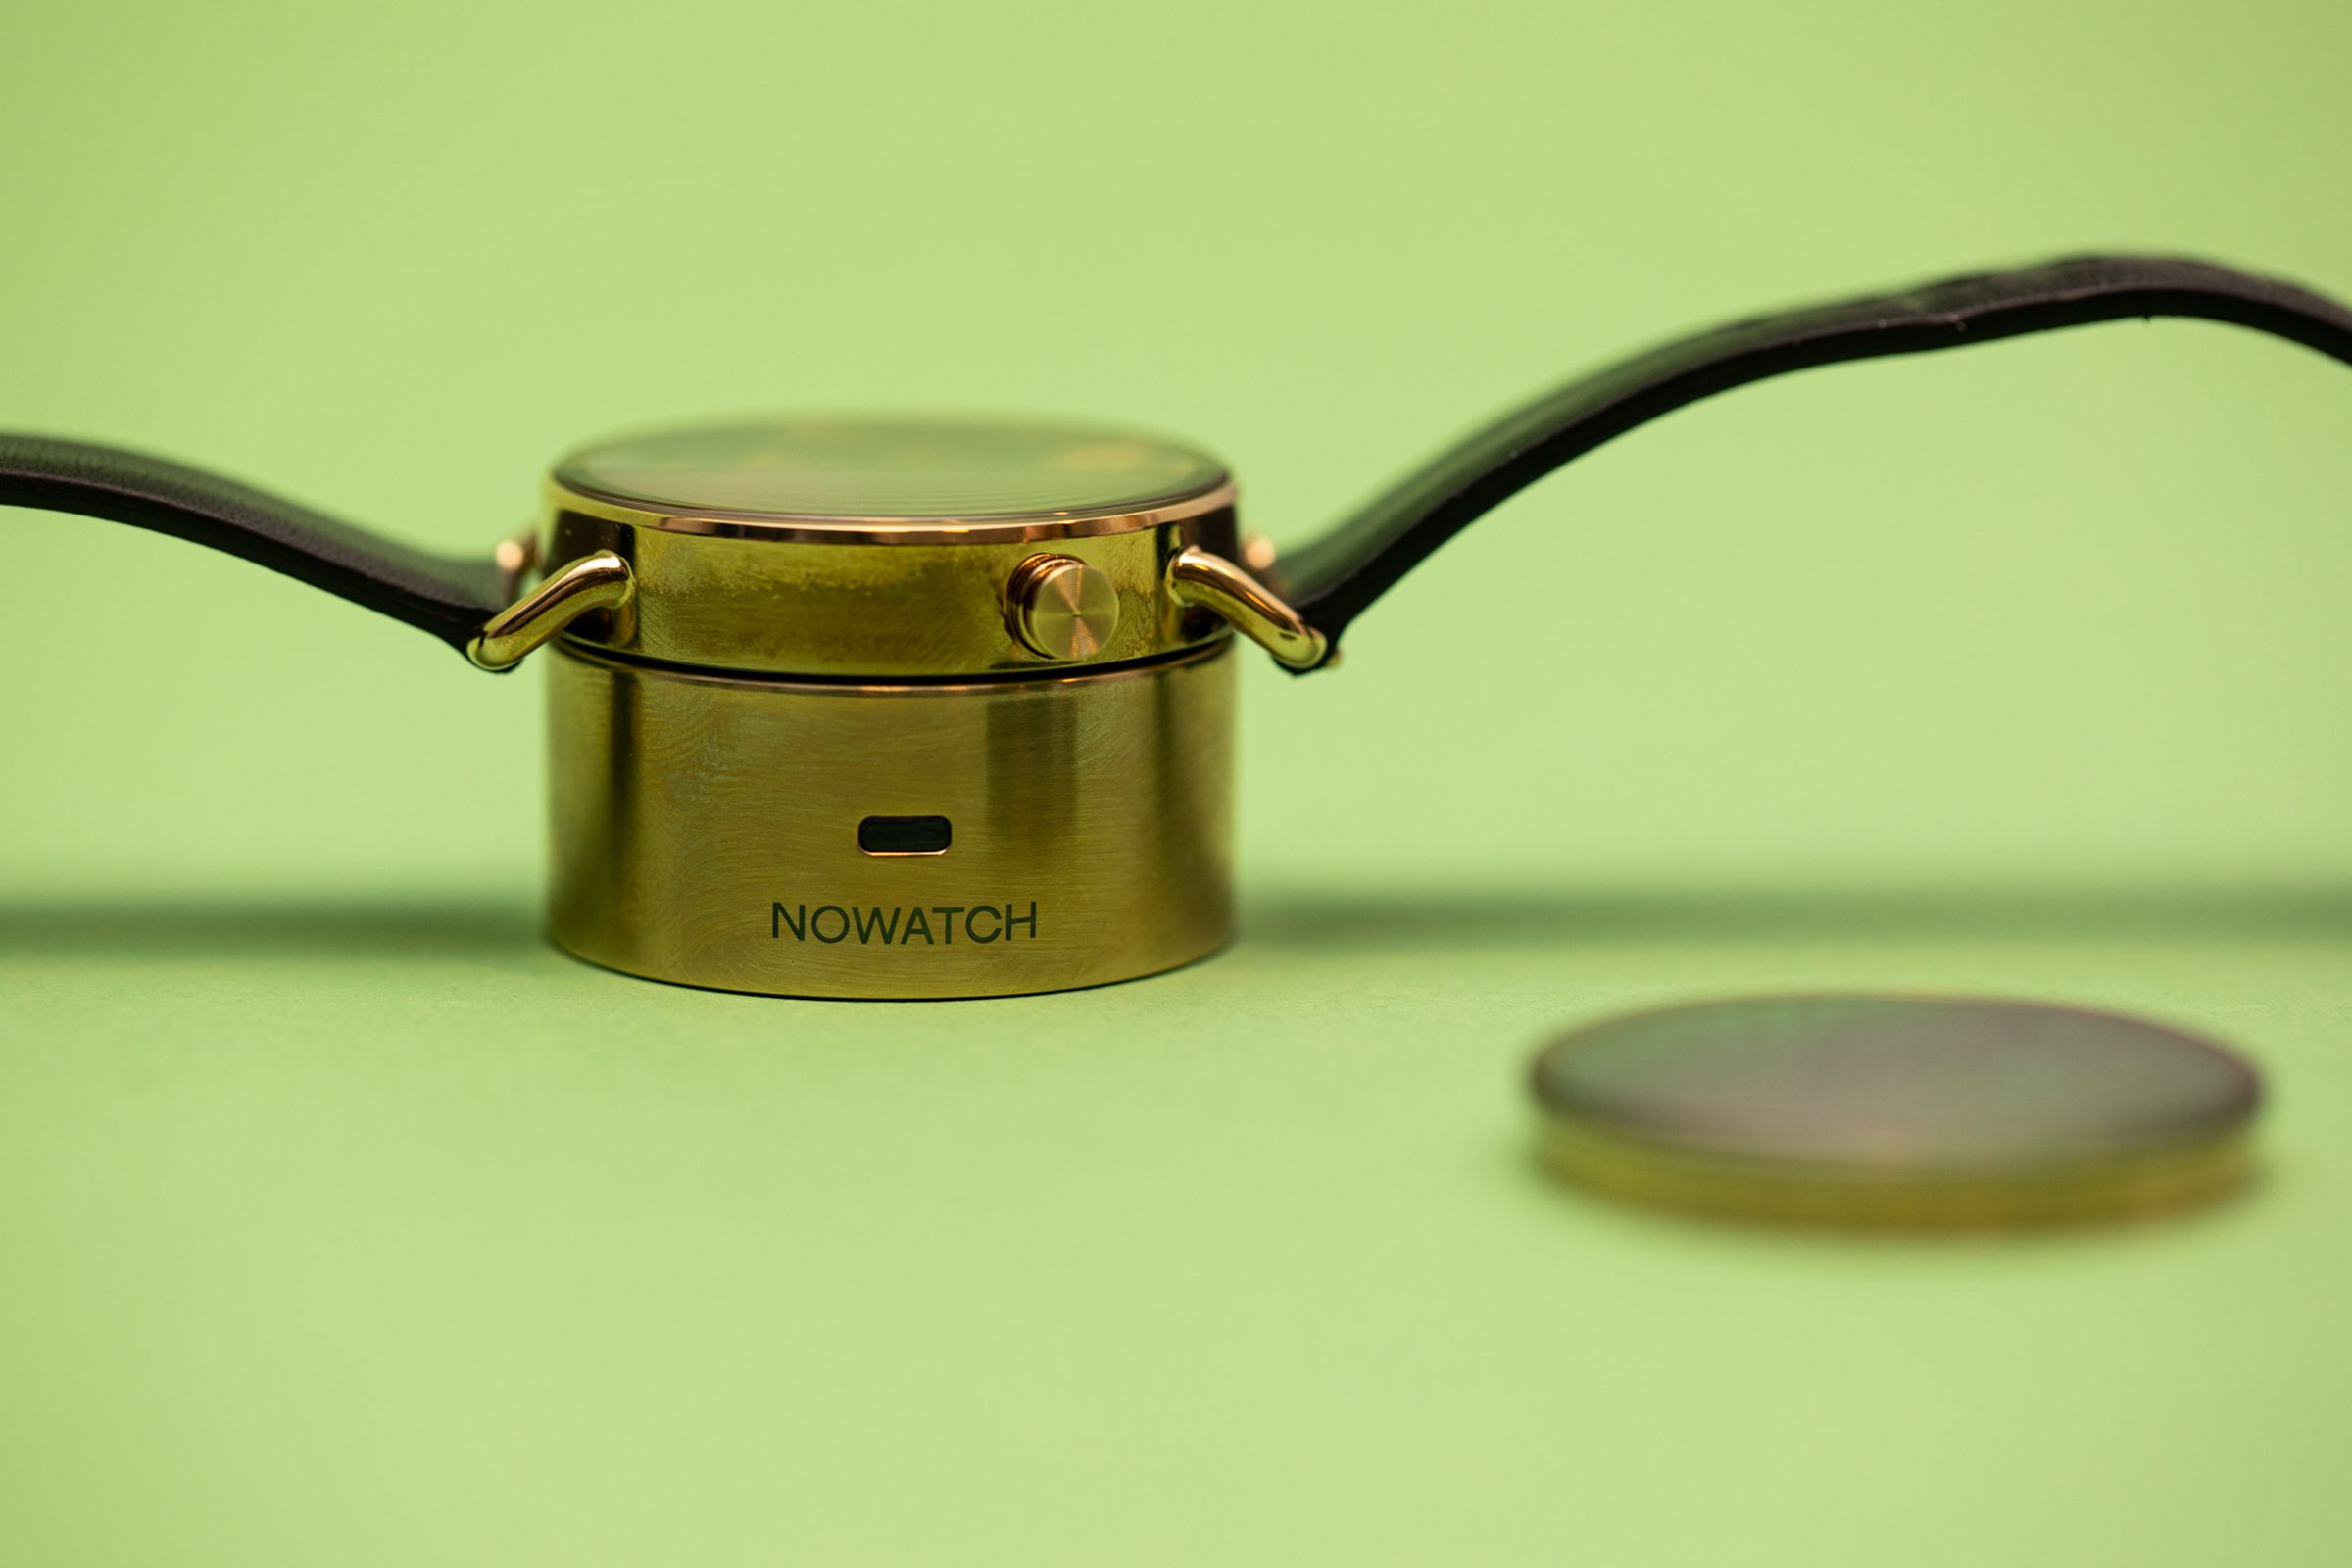 Nowatch device on top of the charging dock with the alternate disc in the foreground.